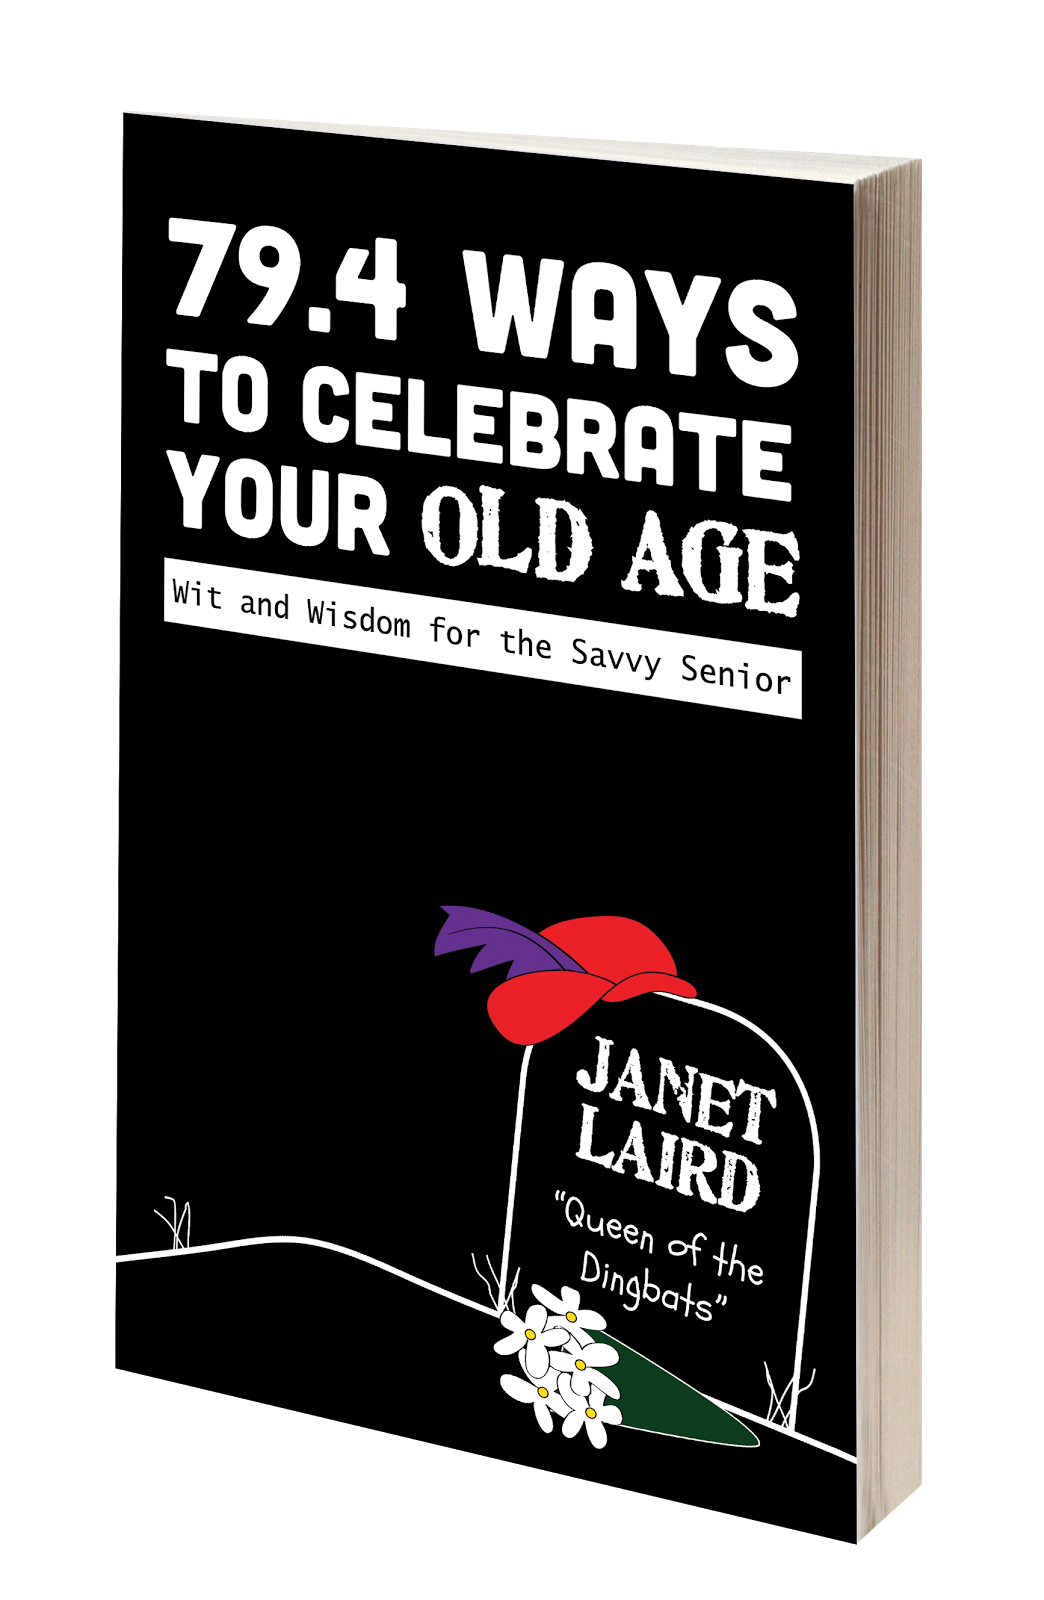 Order "79.4 Ways to Celebrate Old Age"